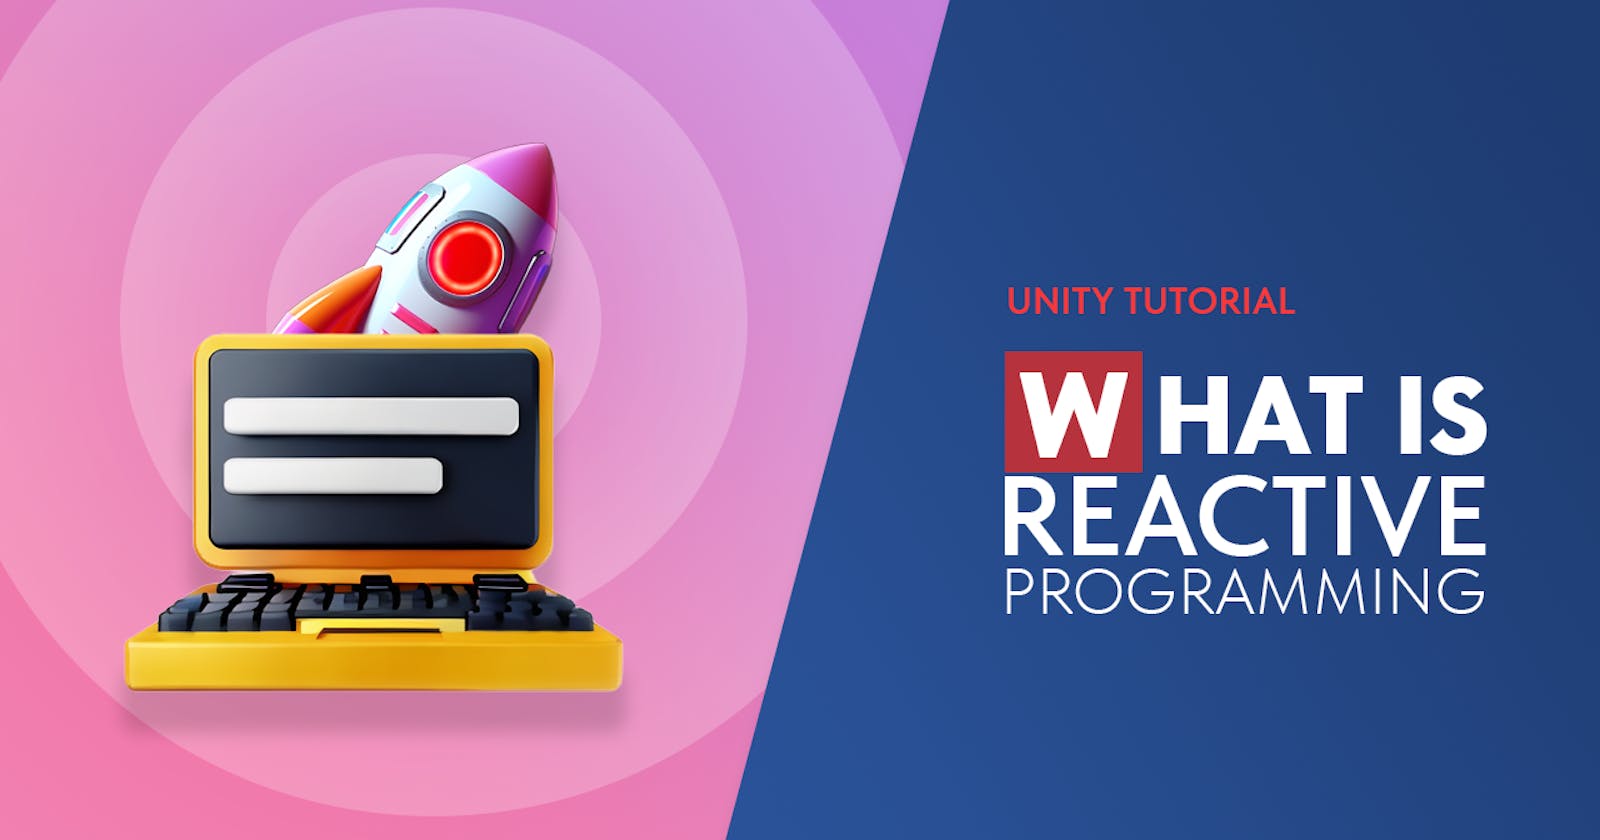 Reactive programming in Gamedev. Let's understand the approach on Unity development examples